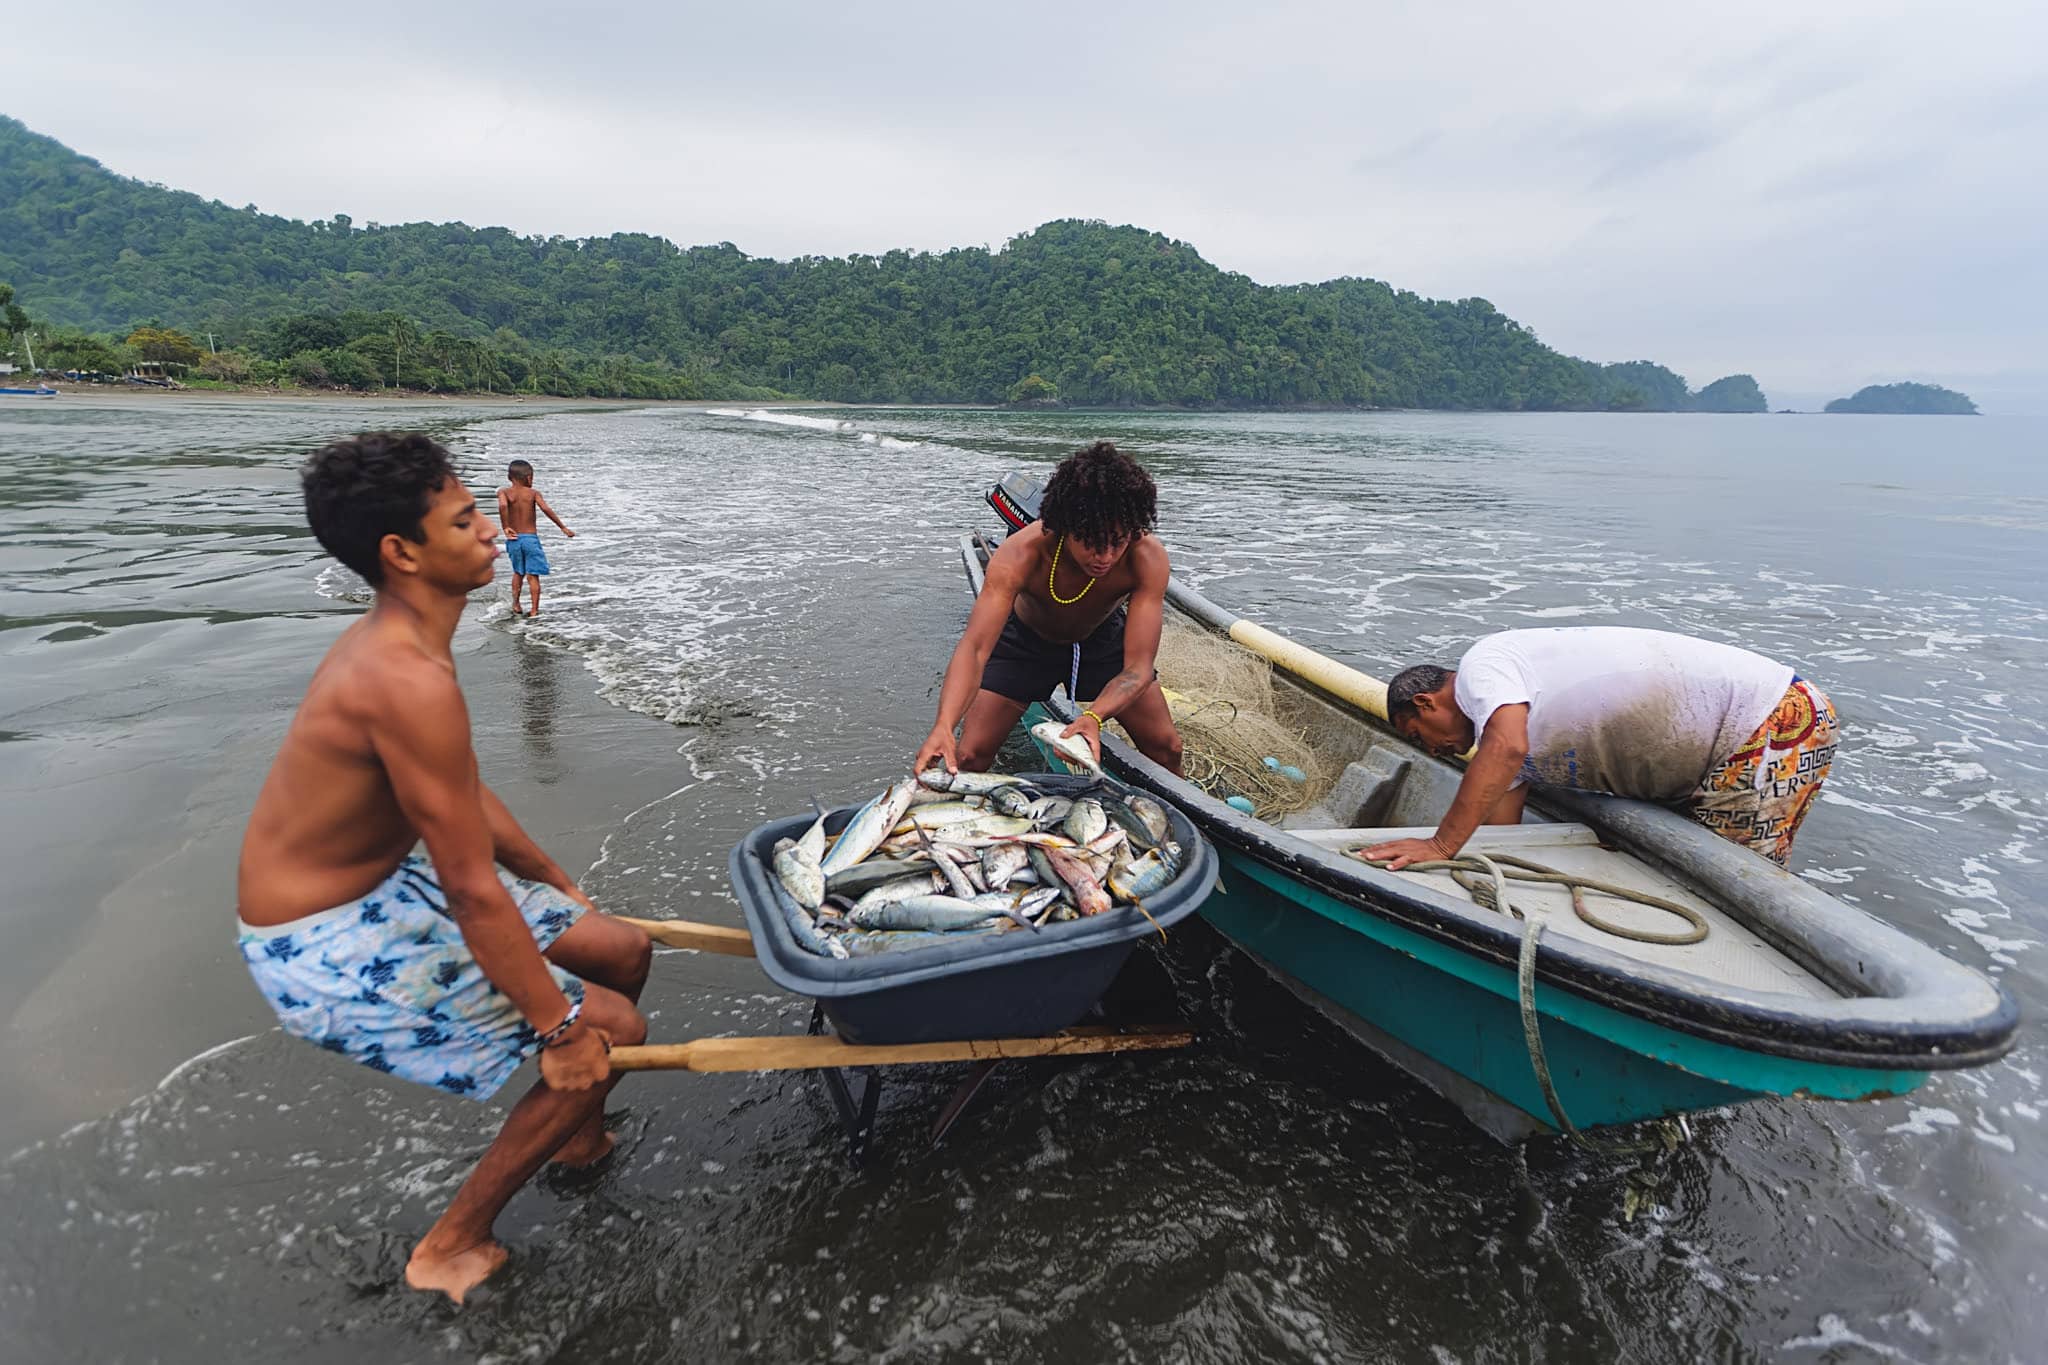 colombian fishermen transporting fish back home after a fruitful night at sea